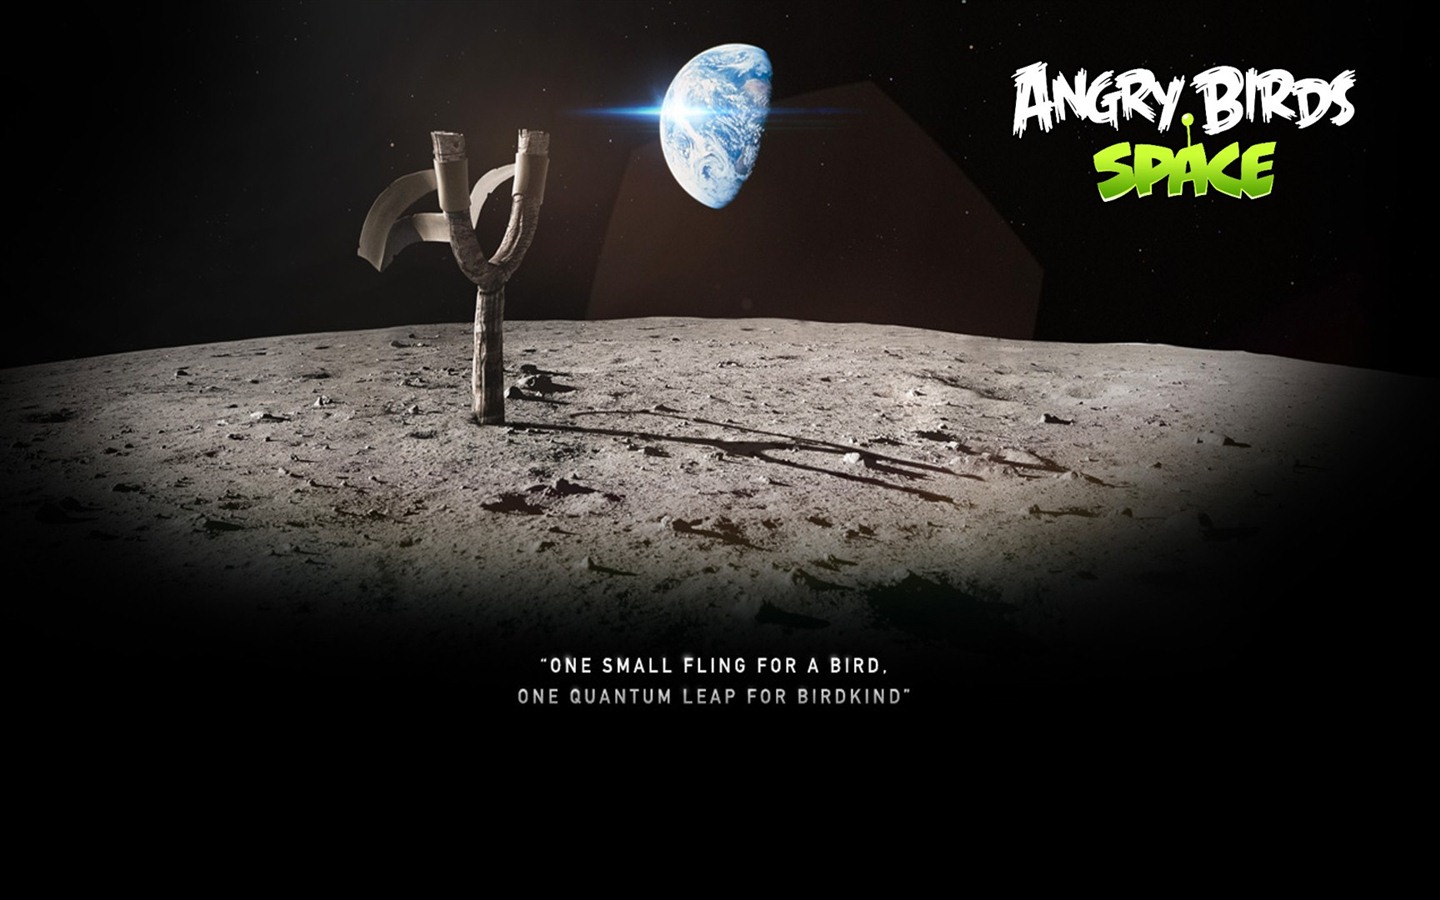 Angry Birds Spiel wallpapers #23 - 1440x900